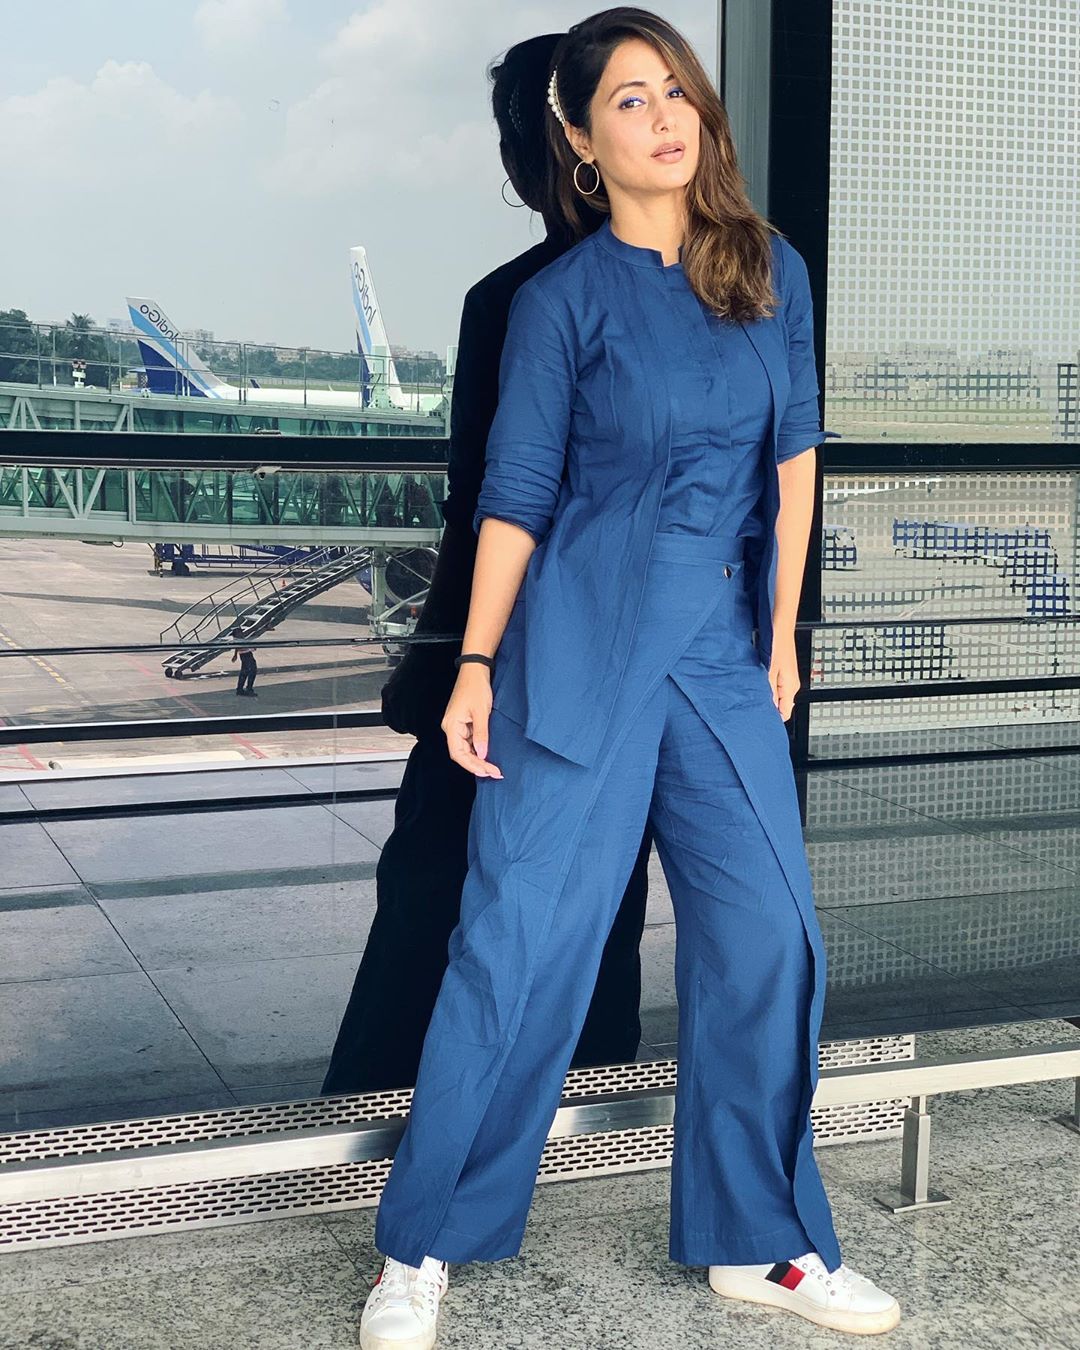 Want to look like a businesswoman? Follow style from Erica Fernandes, Surbhi Chandna and Hina Khan 2